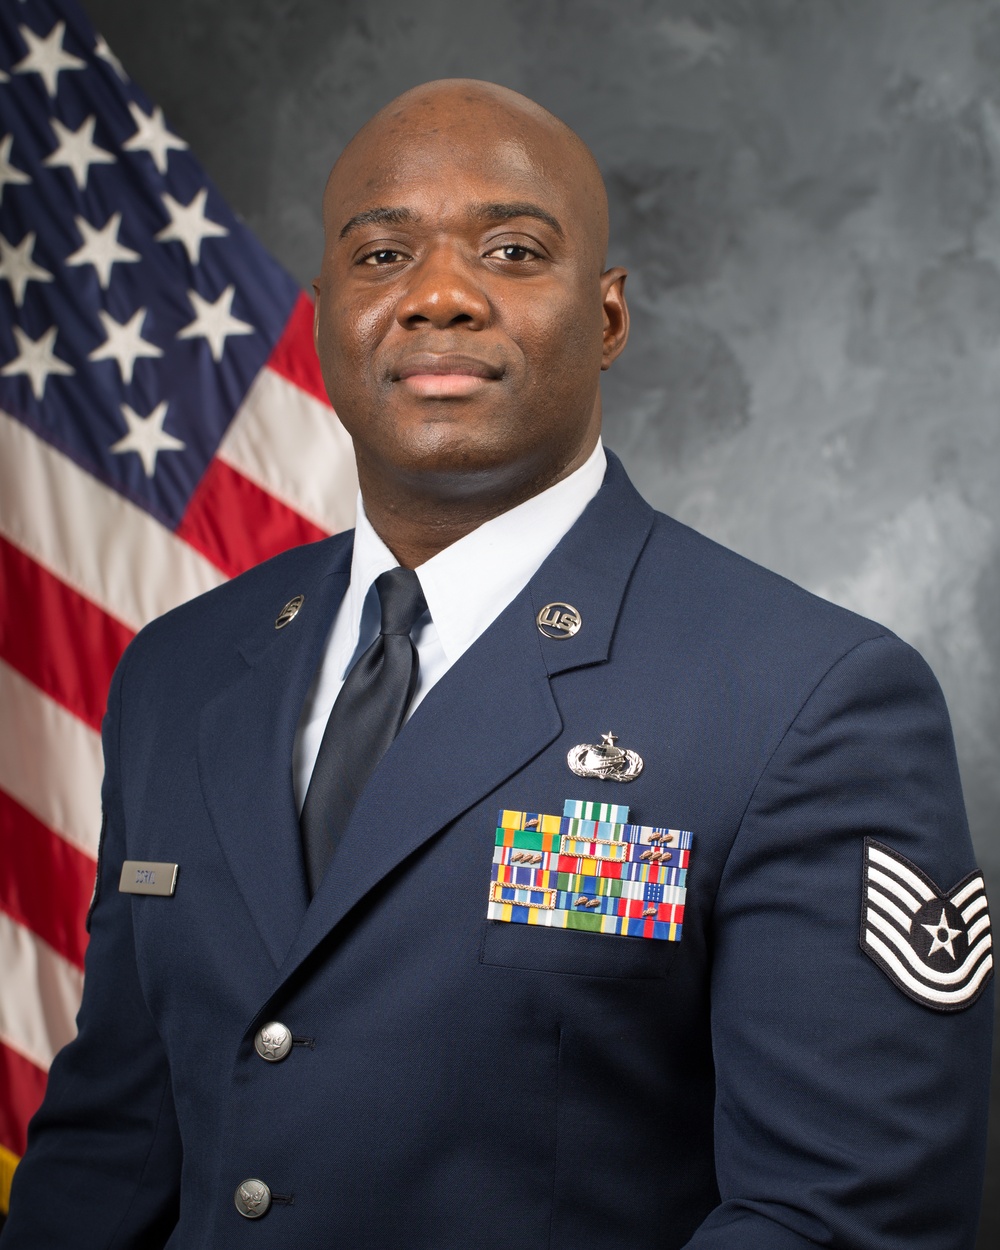 Official portrait, Technical Sgt. Thony Dorvil of Joint Base Anacostia-Bolling's Air Force Element